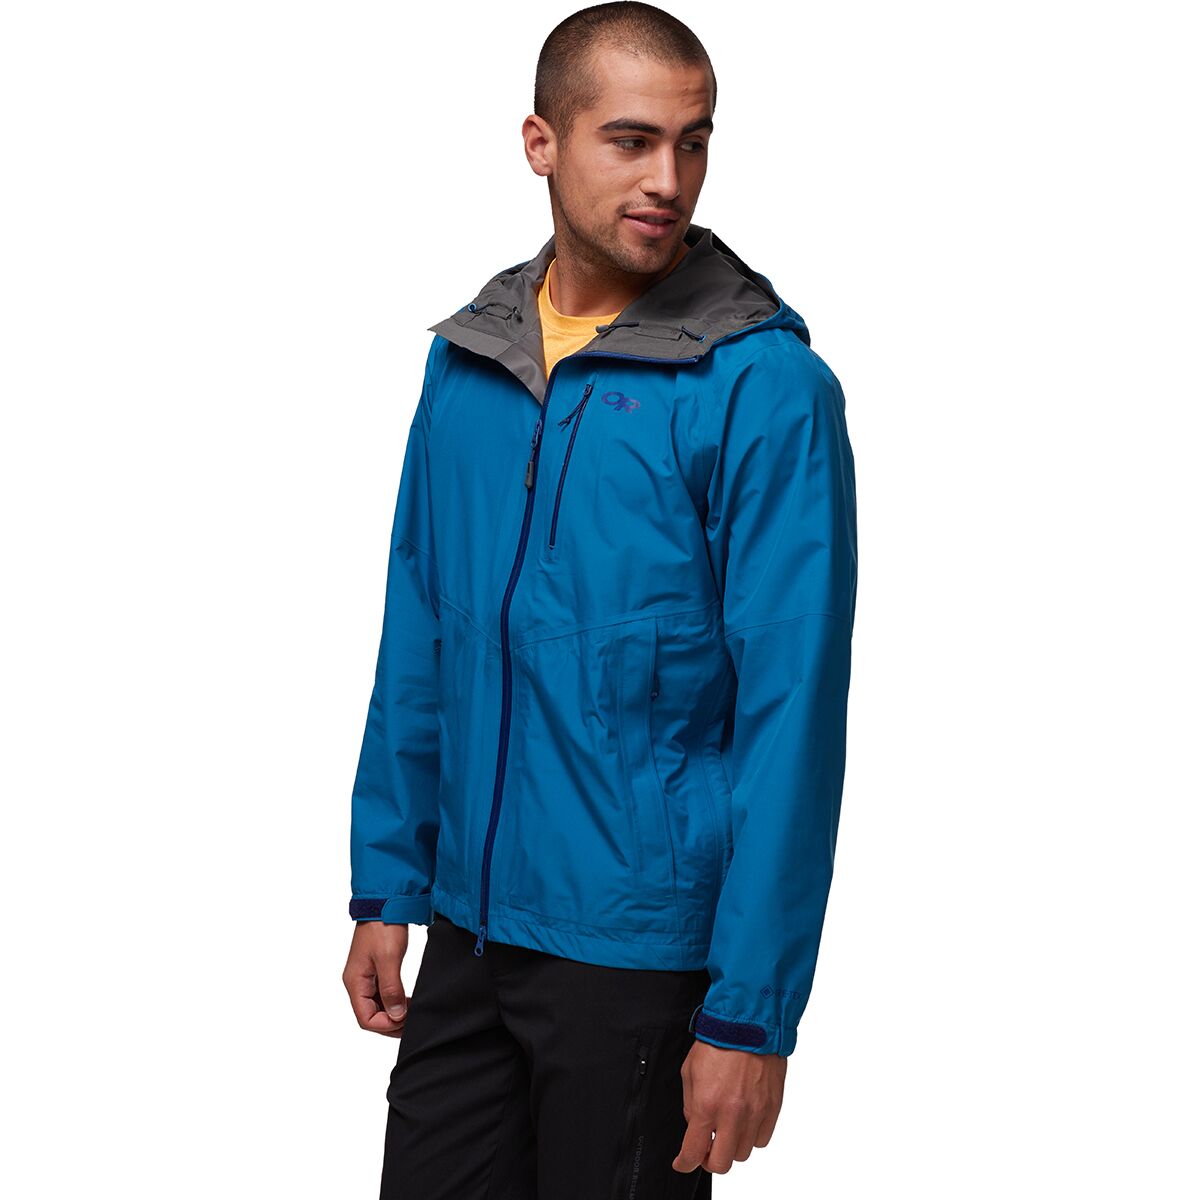 Outdoor Research Foray Jacket - Men's | Backcountry.com